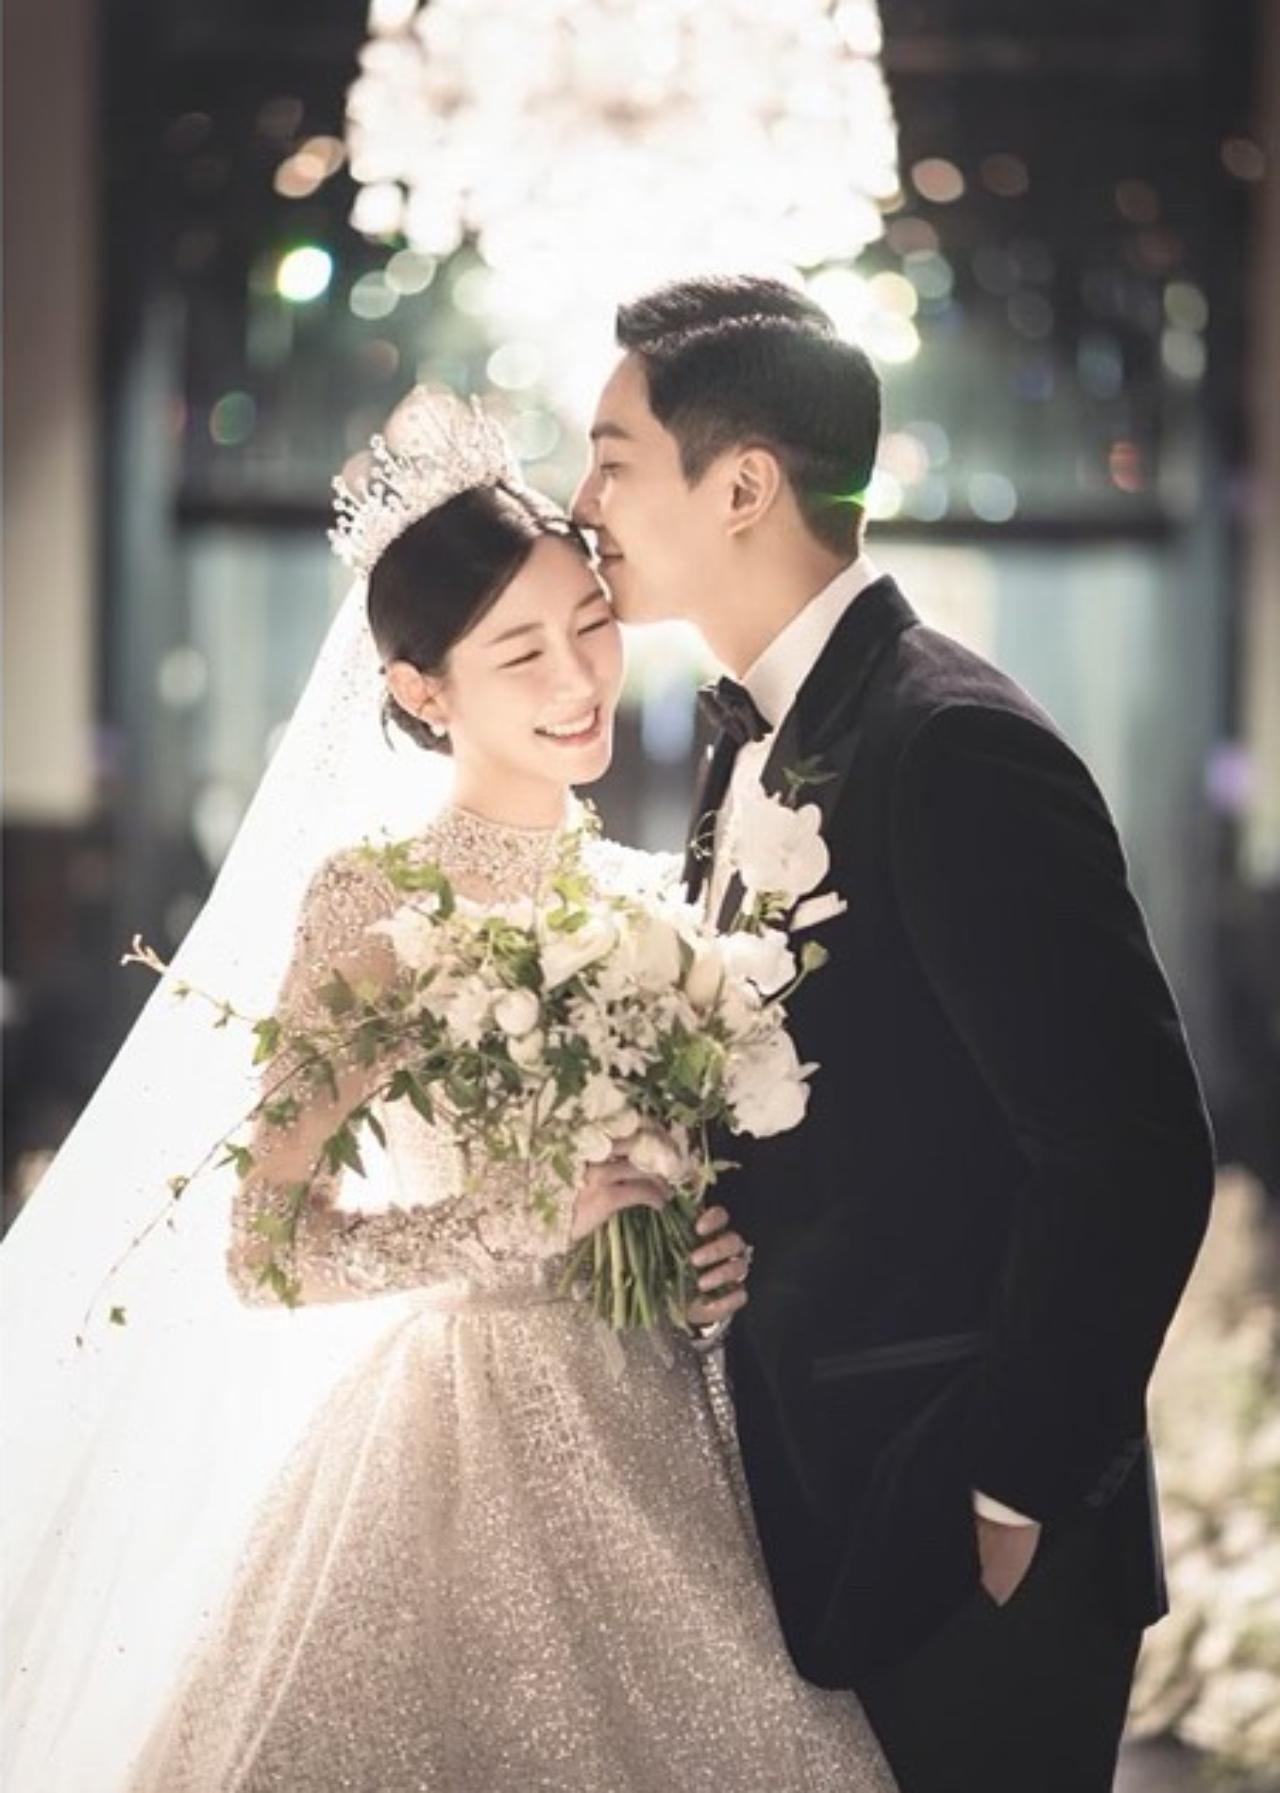 Lee Seung-gi had announced his marriage earlier this year on social media. 